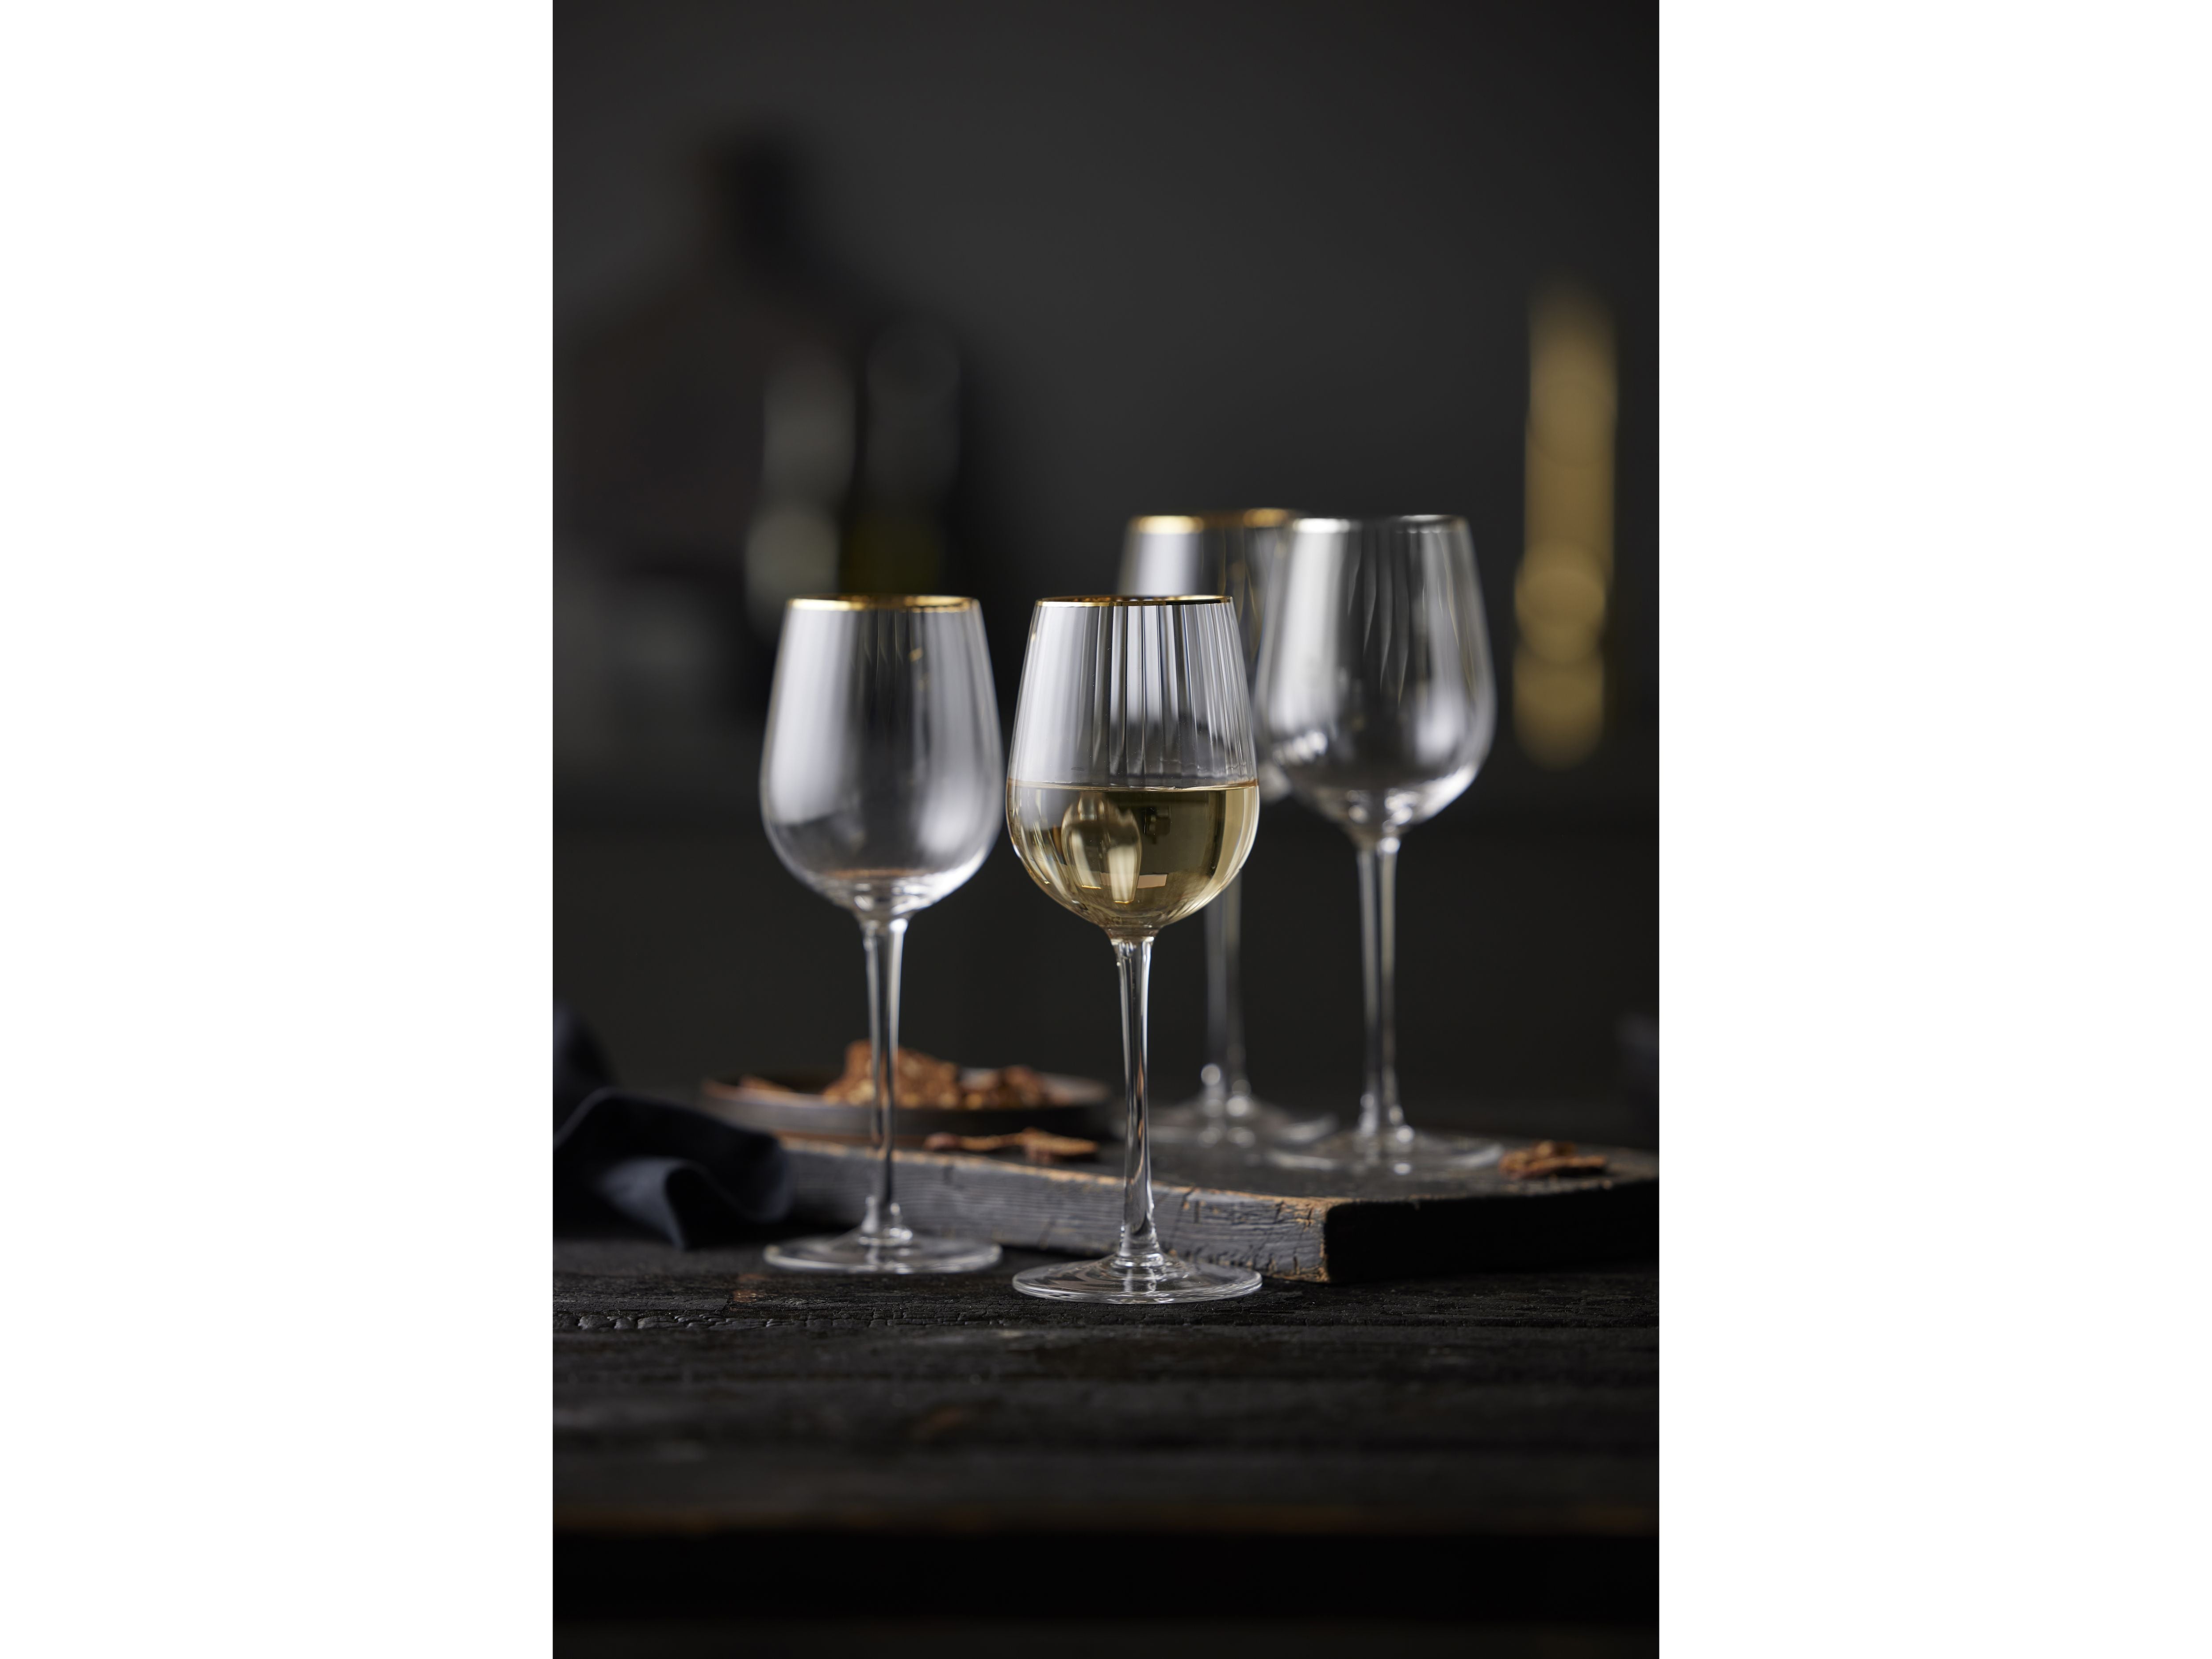 Lyngby Glas Palermo Gold Weißweinglas 30 Cl 4 St.